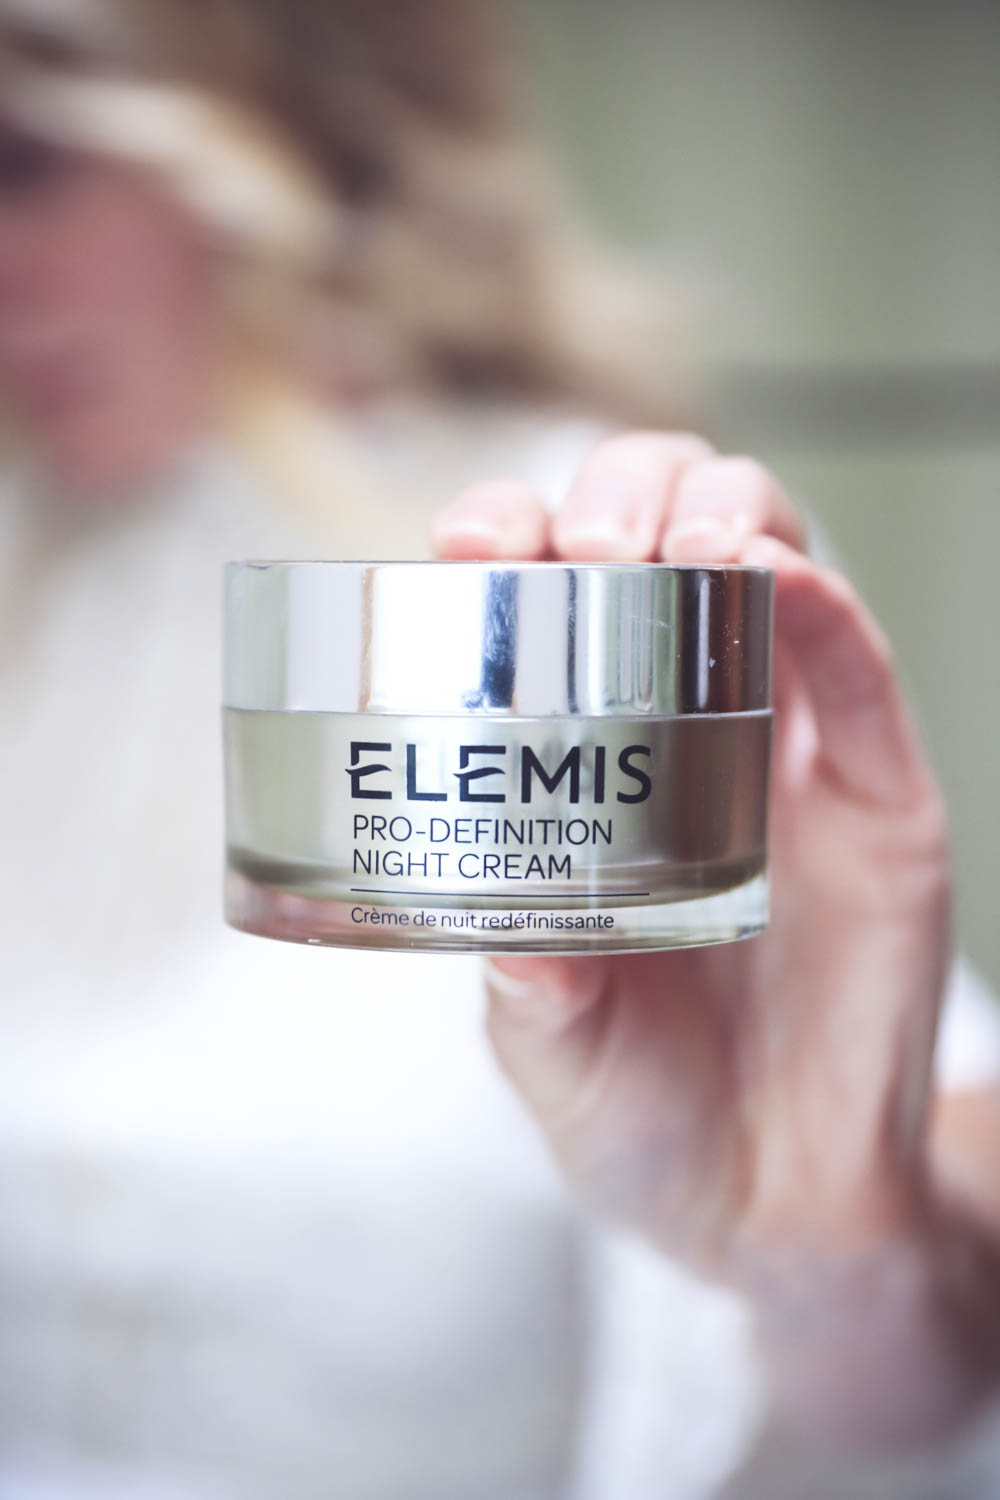 Elemis Night Cream from QVC, spa like moisturizer for nighttime, reviewed by Beauty Blogger Erin Busbee, Beauty over 40